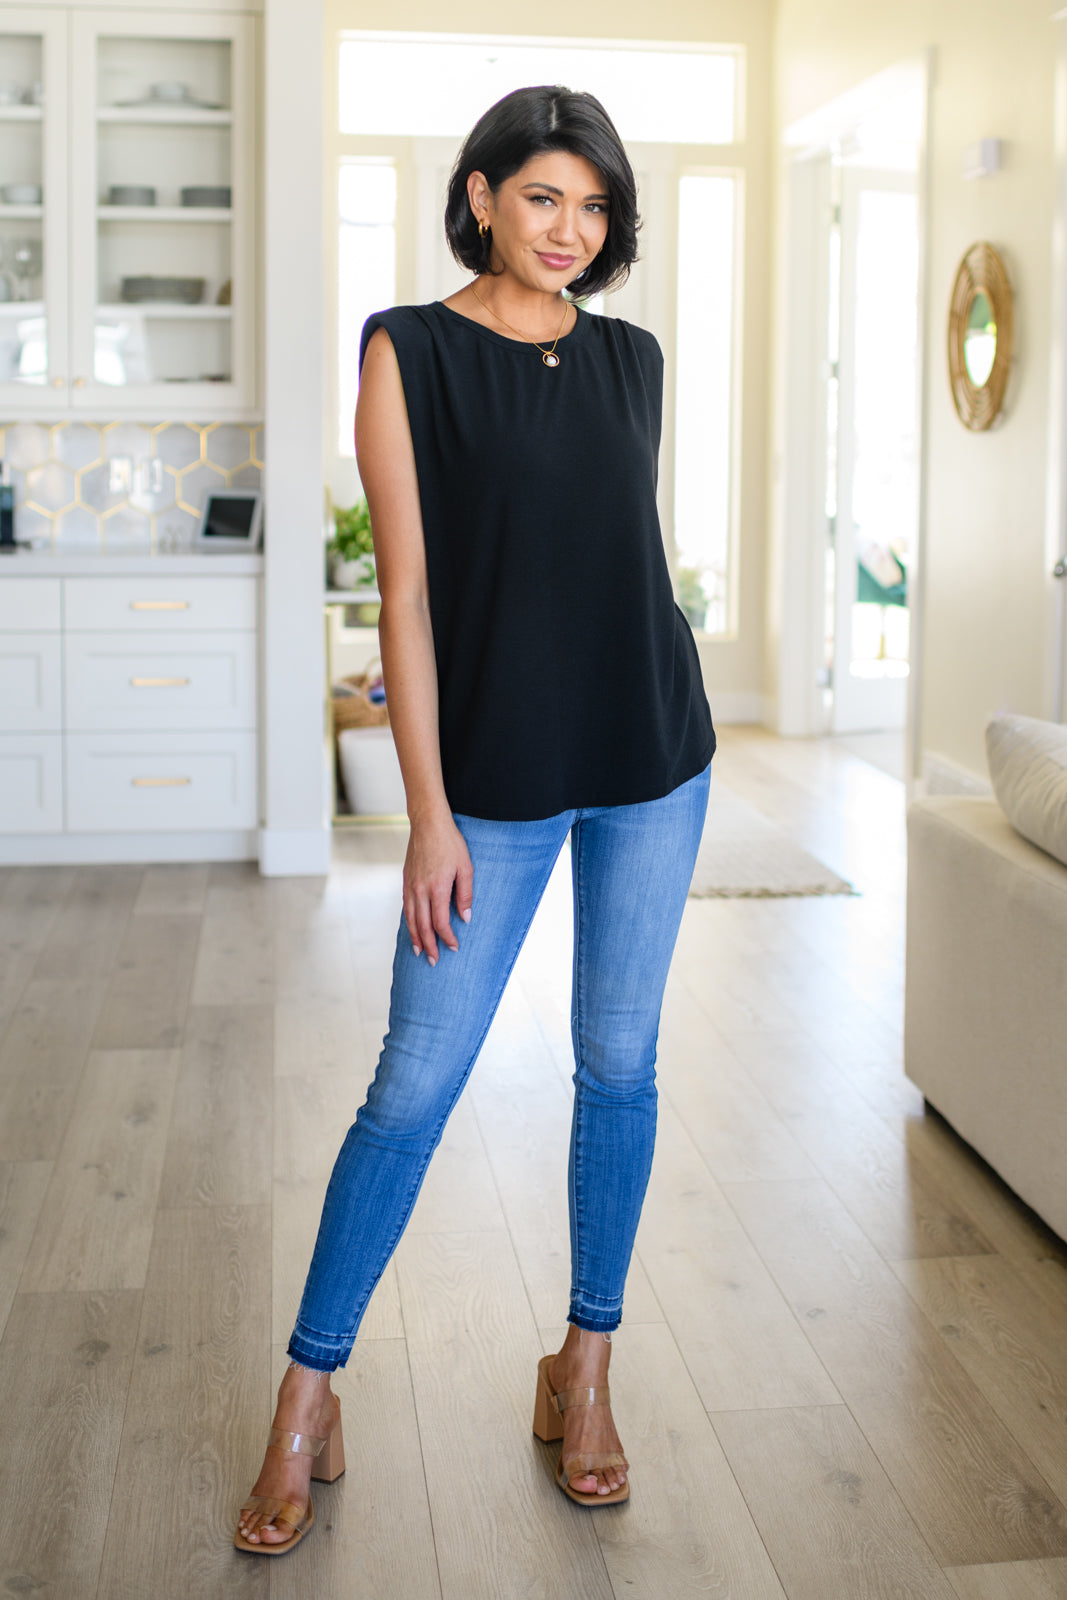 This Juke Box Hero Shoulder Pad Top is perfect for your next night out. Crafted with comfy jersey knit material, it features sewn in shoulder pads for a flattering fit and side slits for a modern, edgy look. Its stretchy material allows for versatile styling. Get ready to turn heads! S - 3X